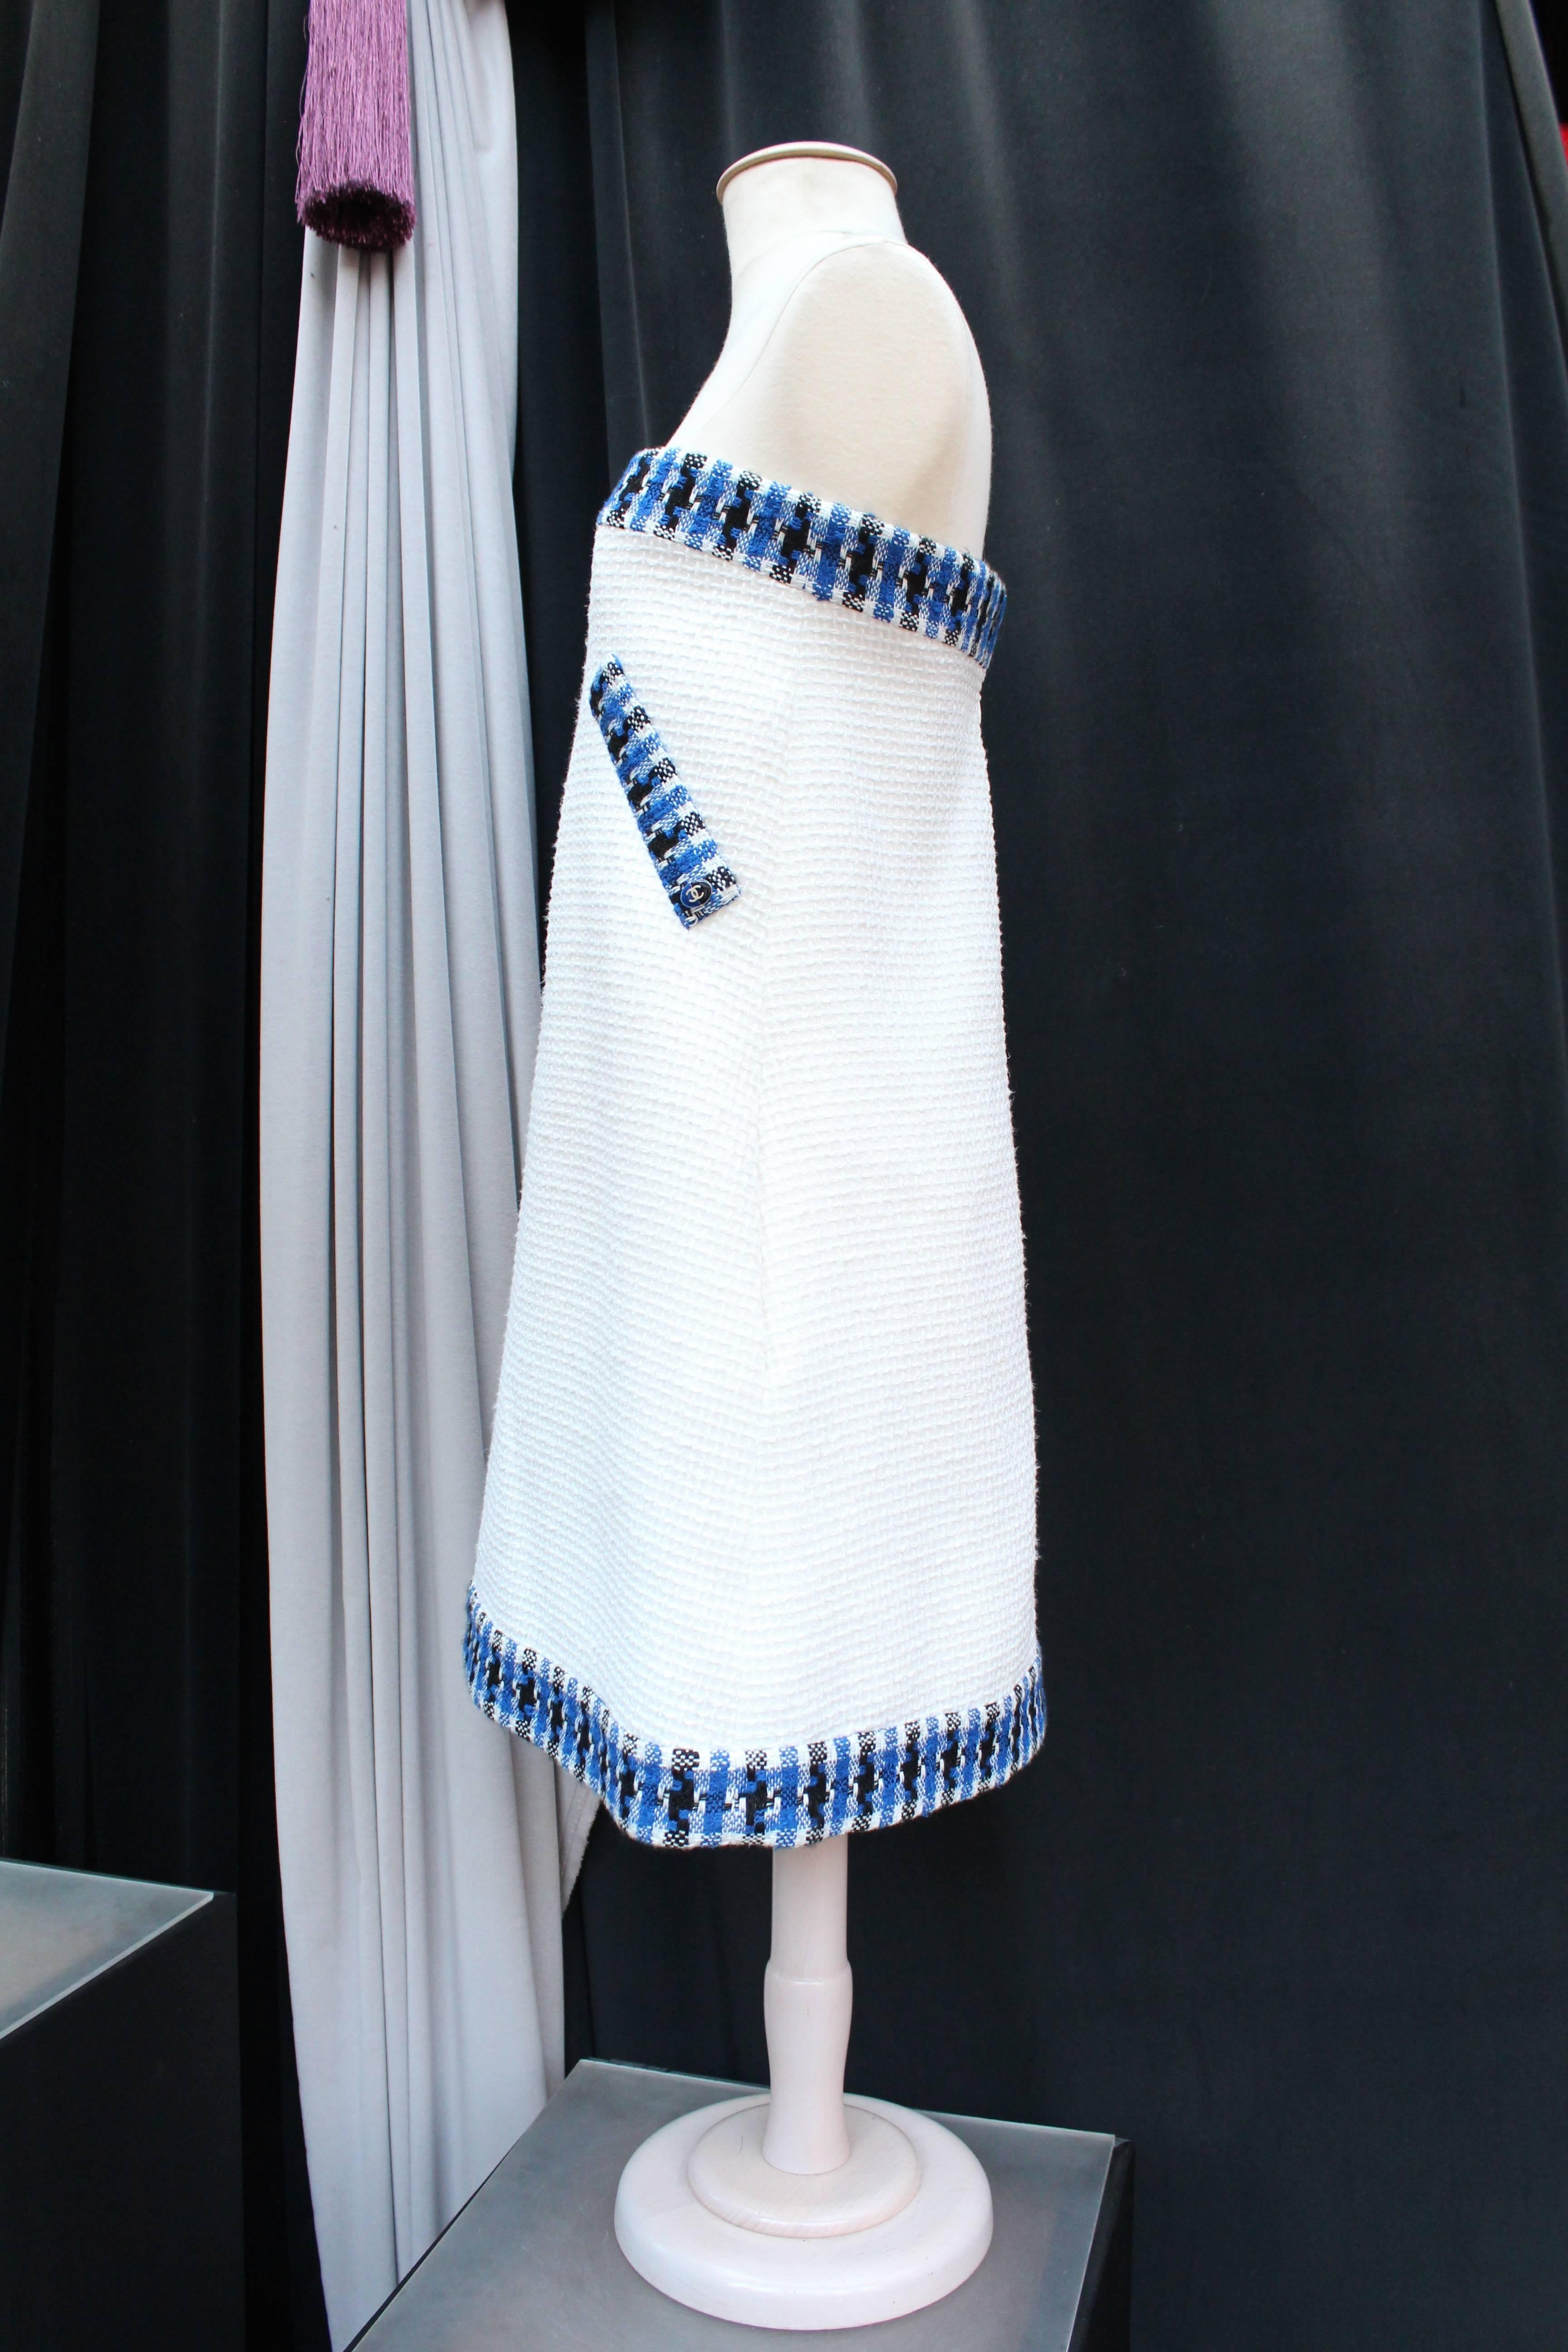 2013 Chanel Strapless Dress in White Blue and Black Cotton 2